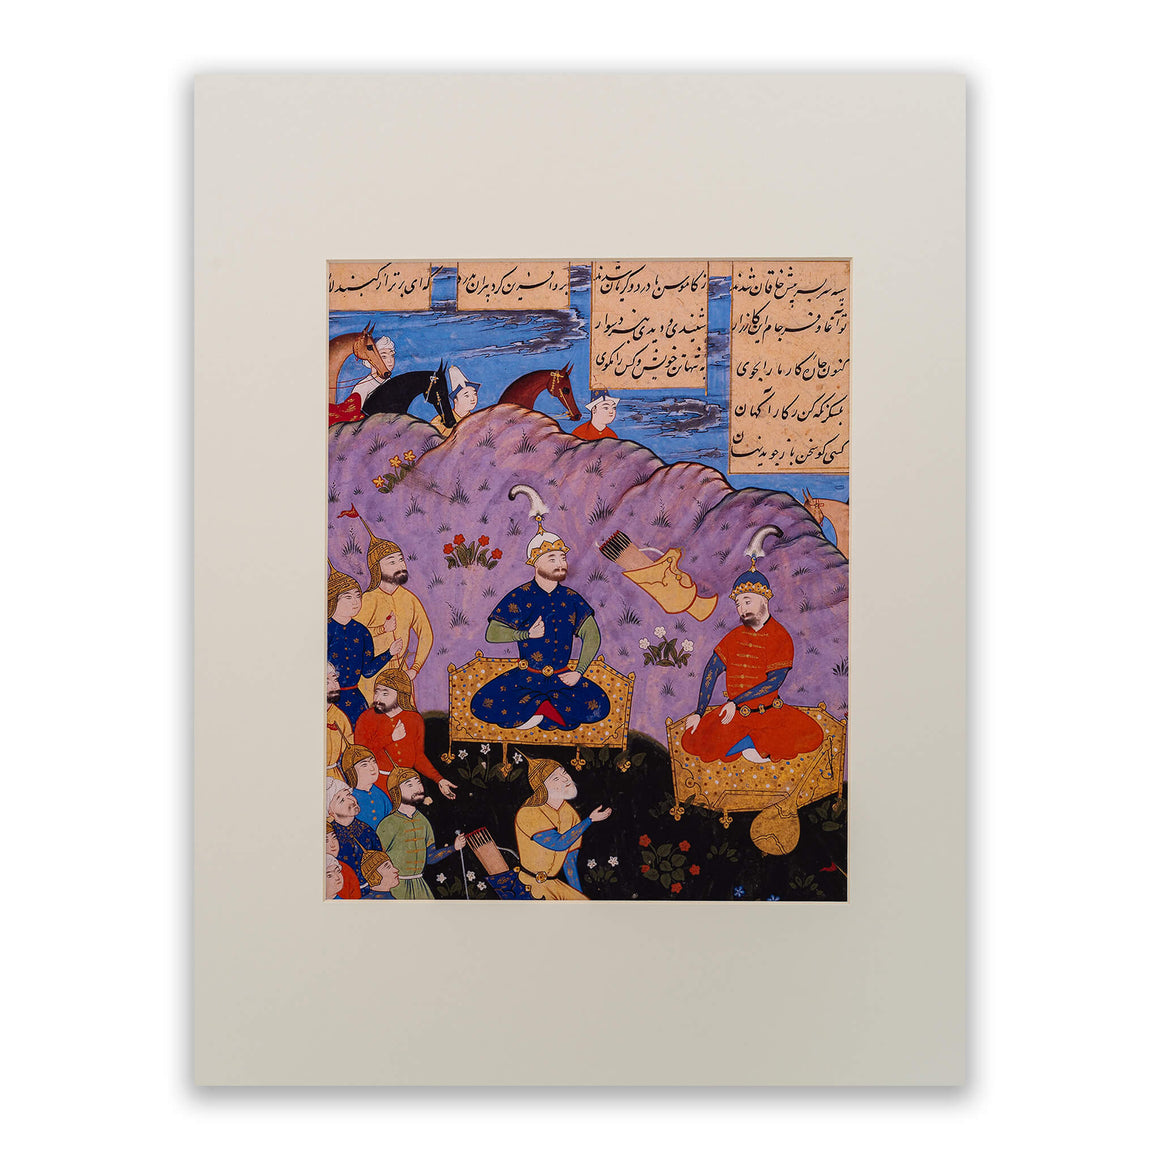 Printed Painting Frame - The Khaqan of Chin Consults his Advisors(print only)